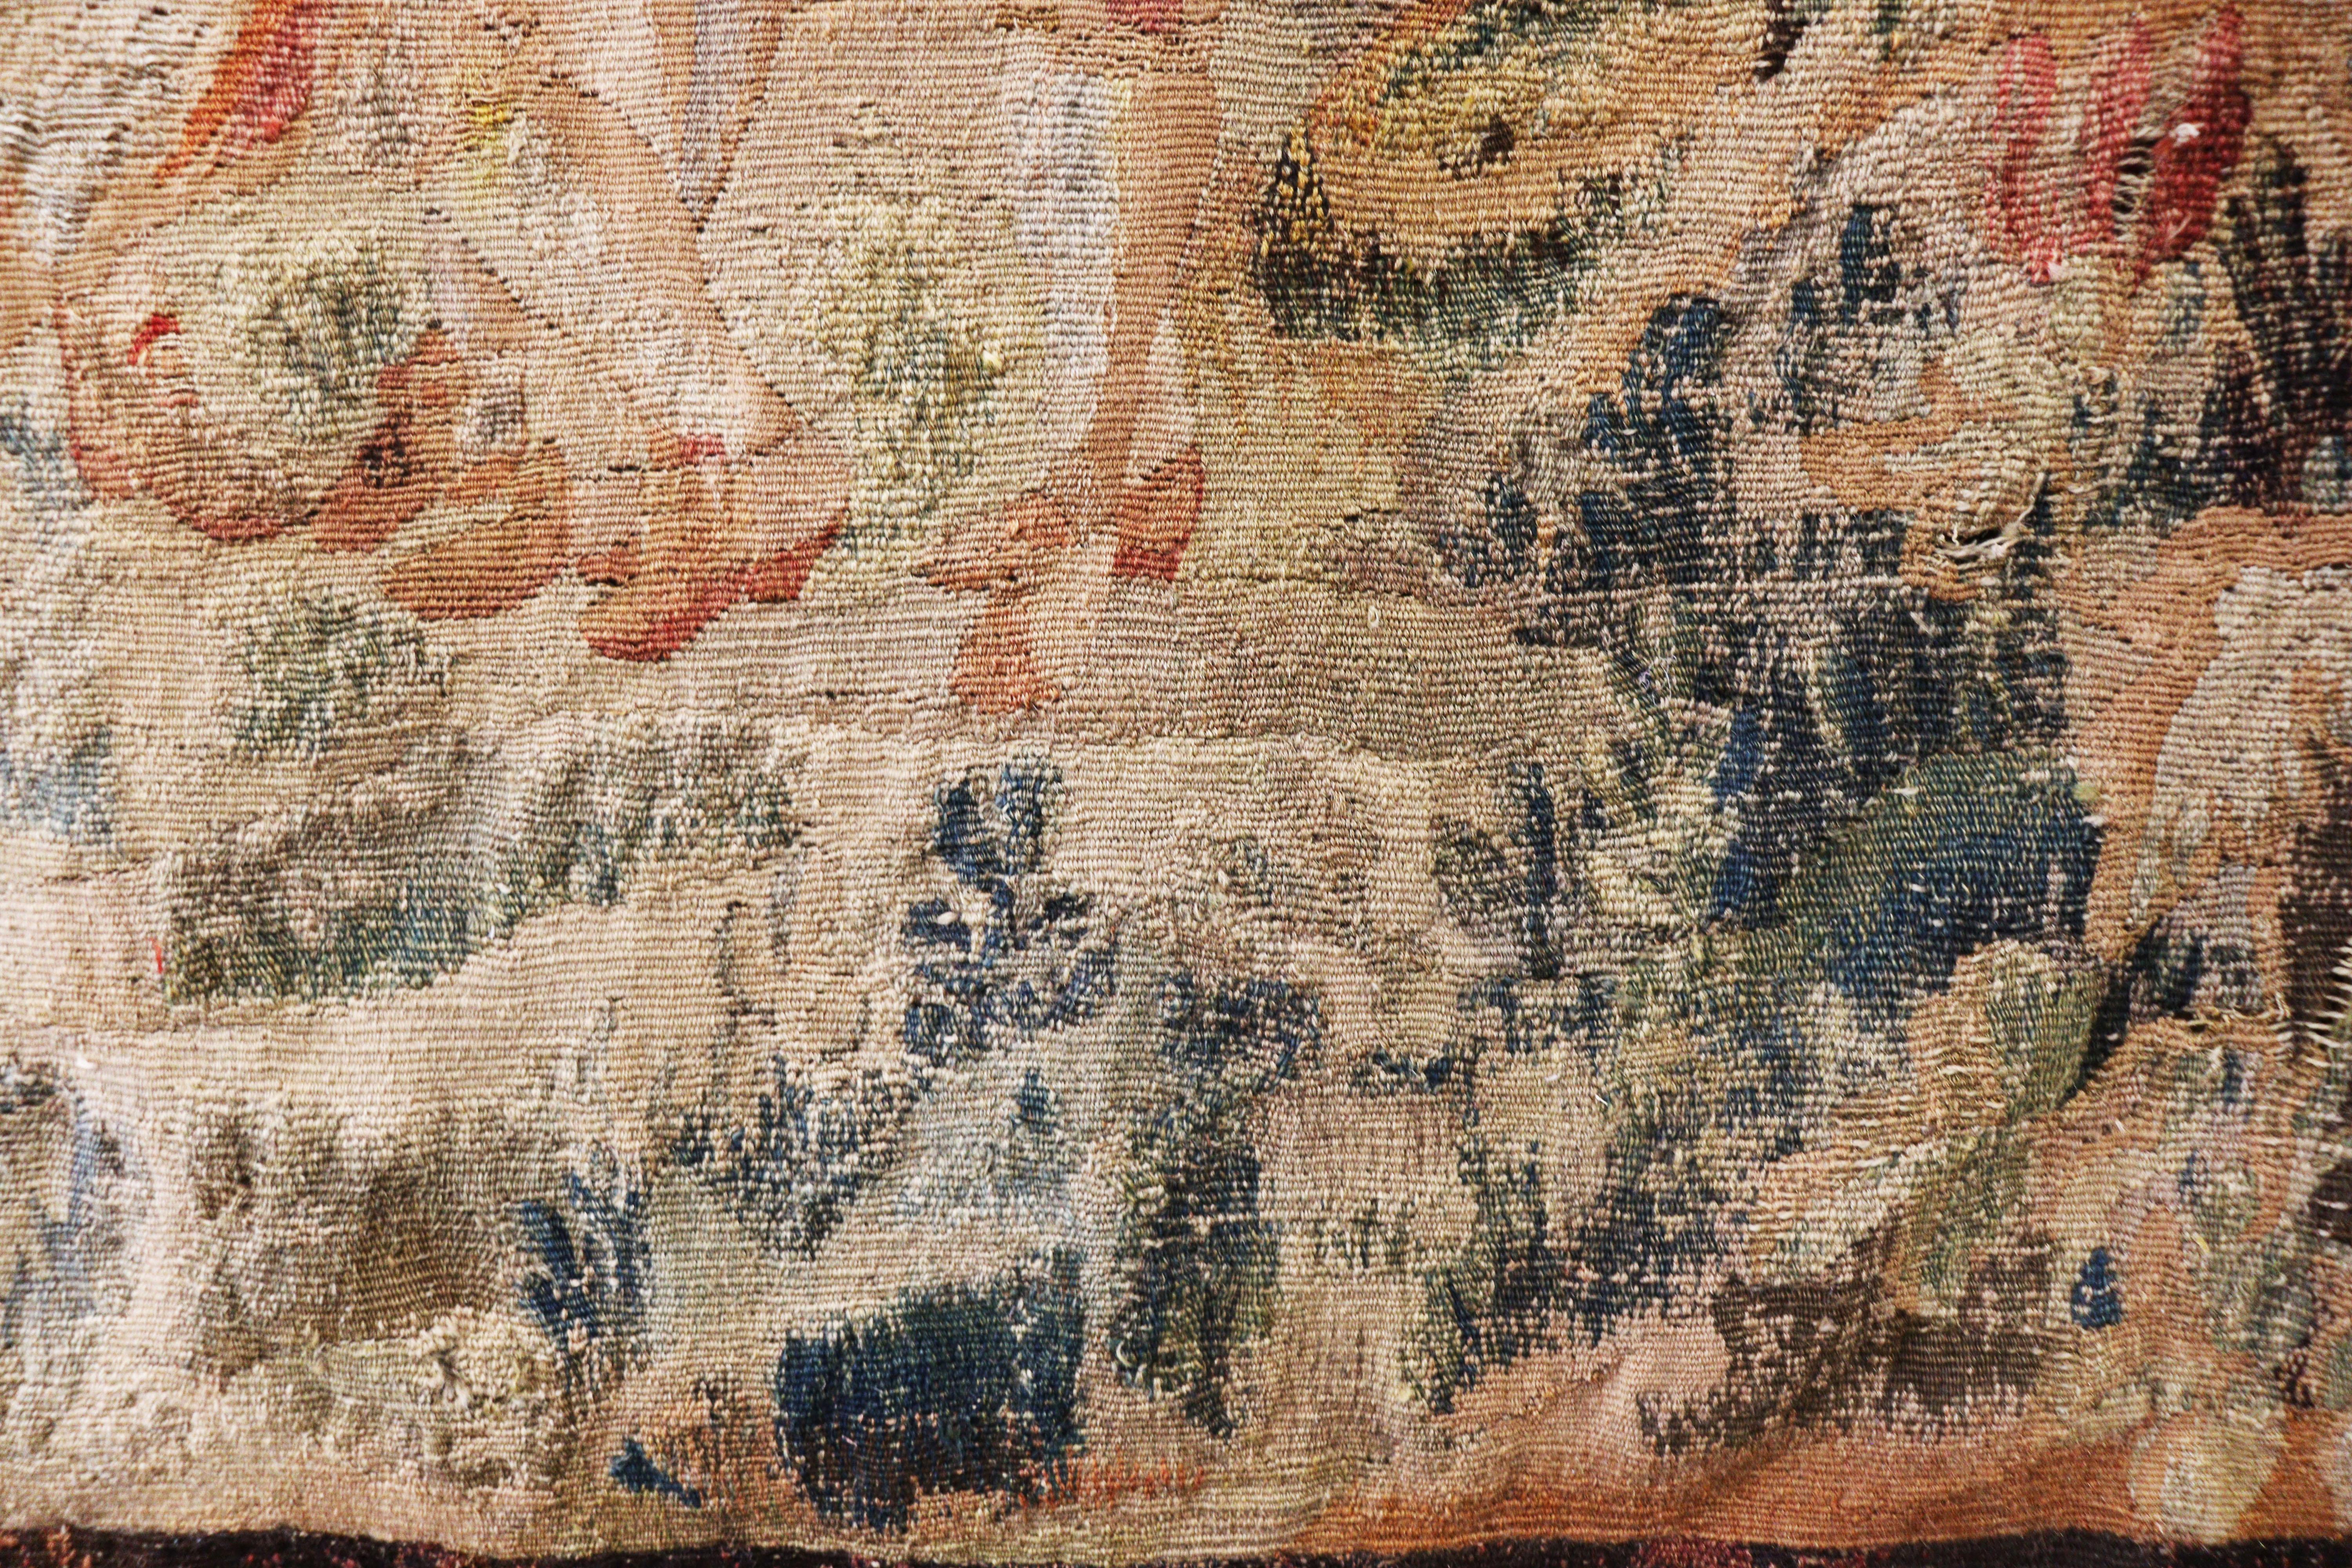 A fine and rectangular tapestry woven in tan and rust tones with green. In the center is a forest landscape.
Made of wool and silk.